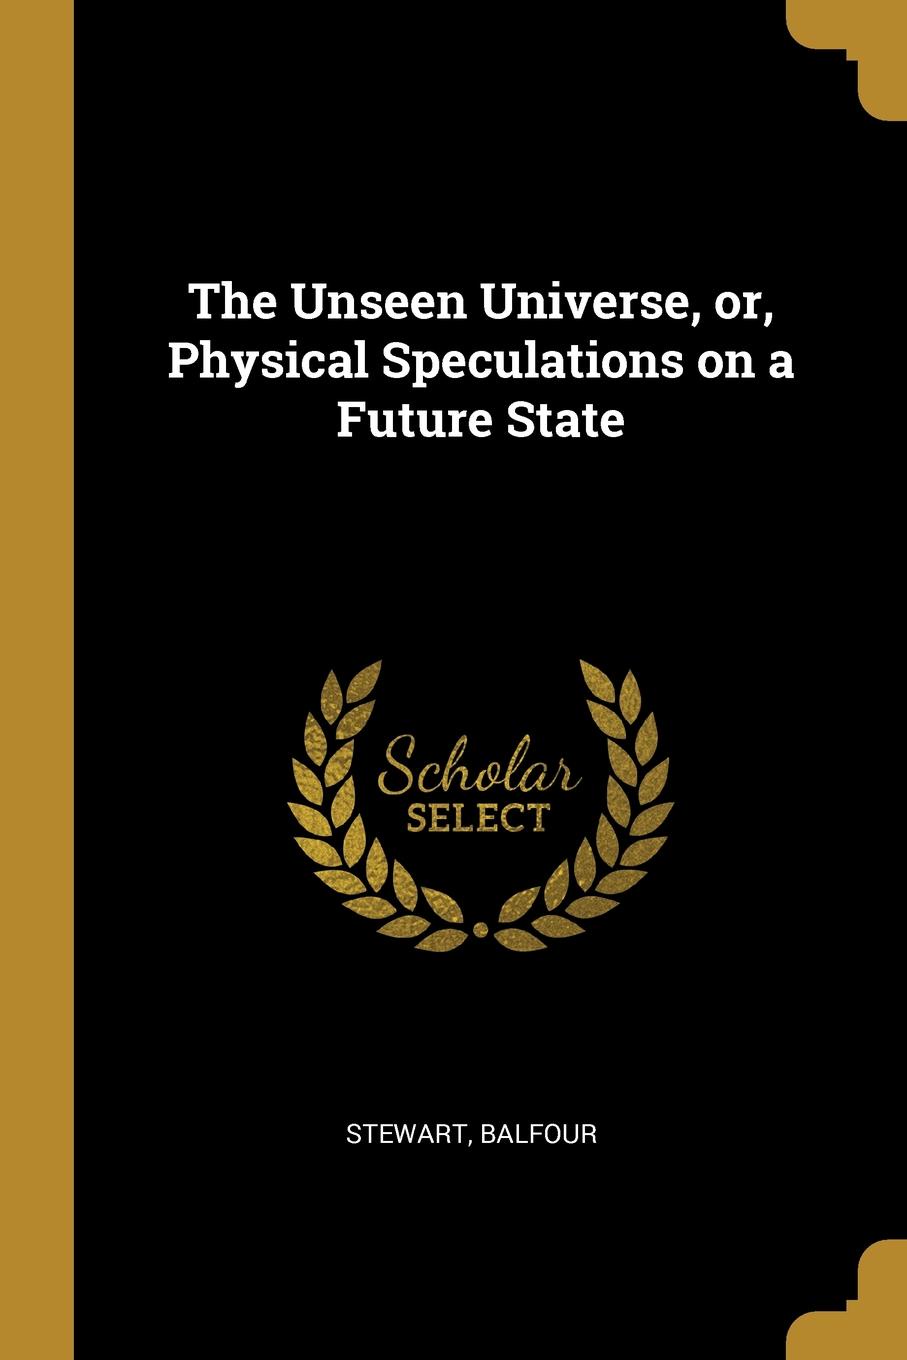 The Unseen Universe, or, Physical Speculations on a Future State